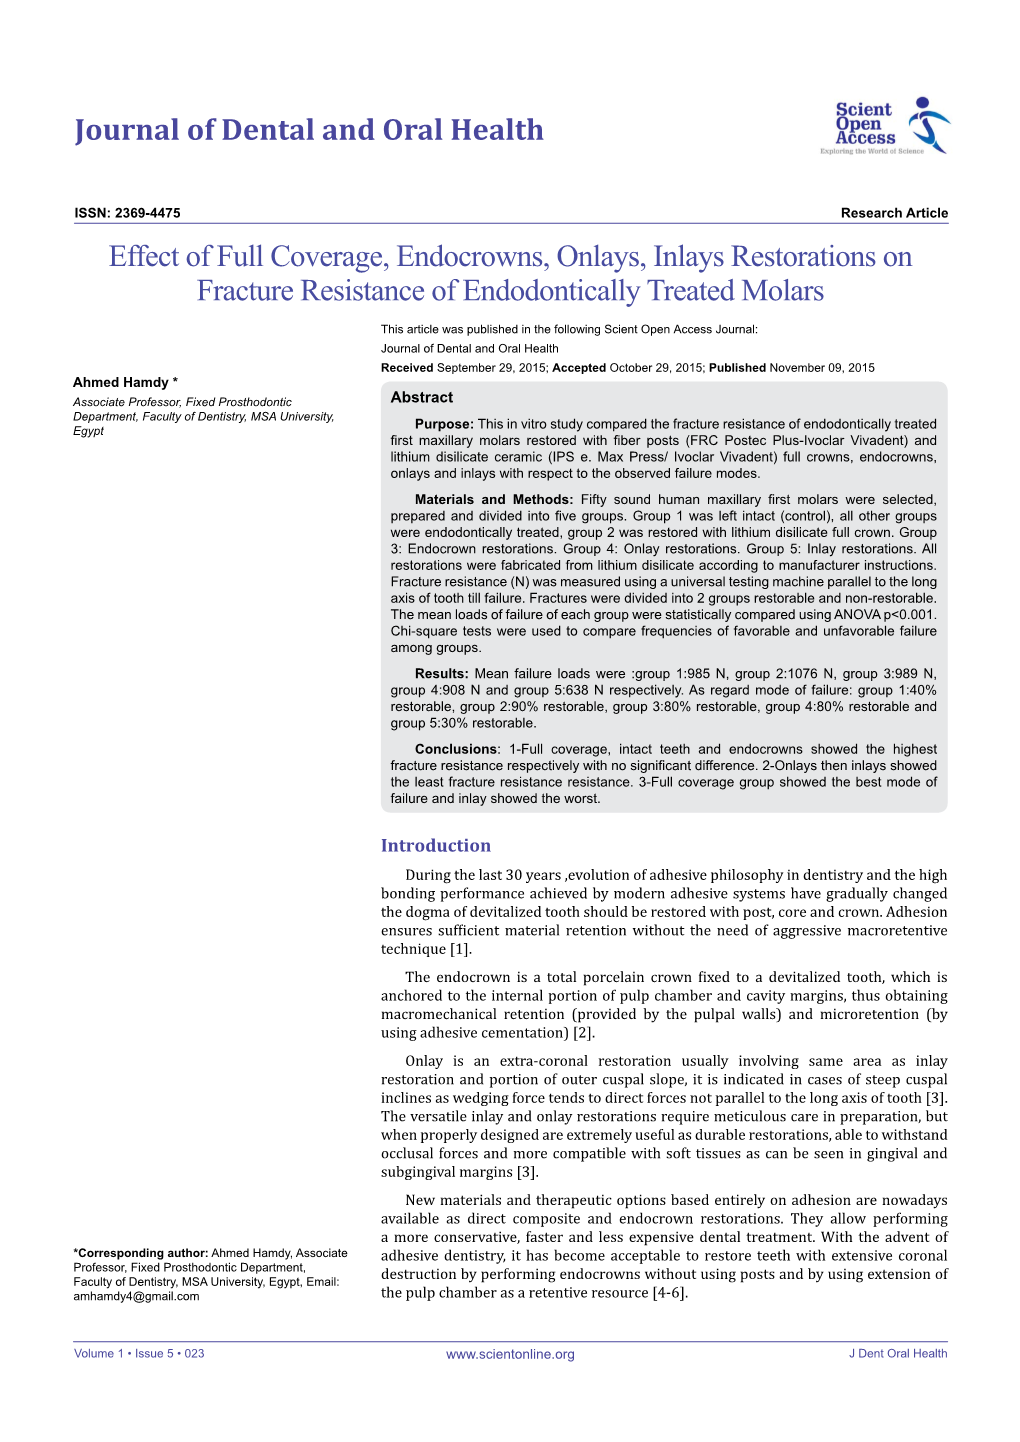 Effect of Full Coverage, Endocrowns, Onlays, Inlays Restorations on Fracture Resistance of Endodontically Treated Molars